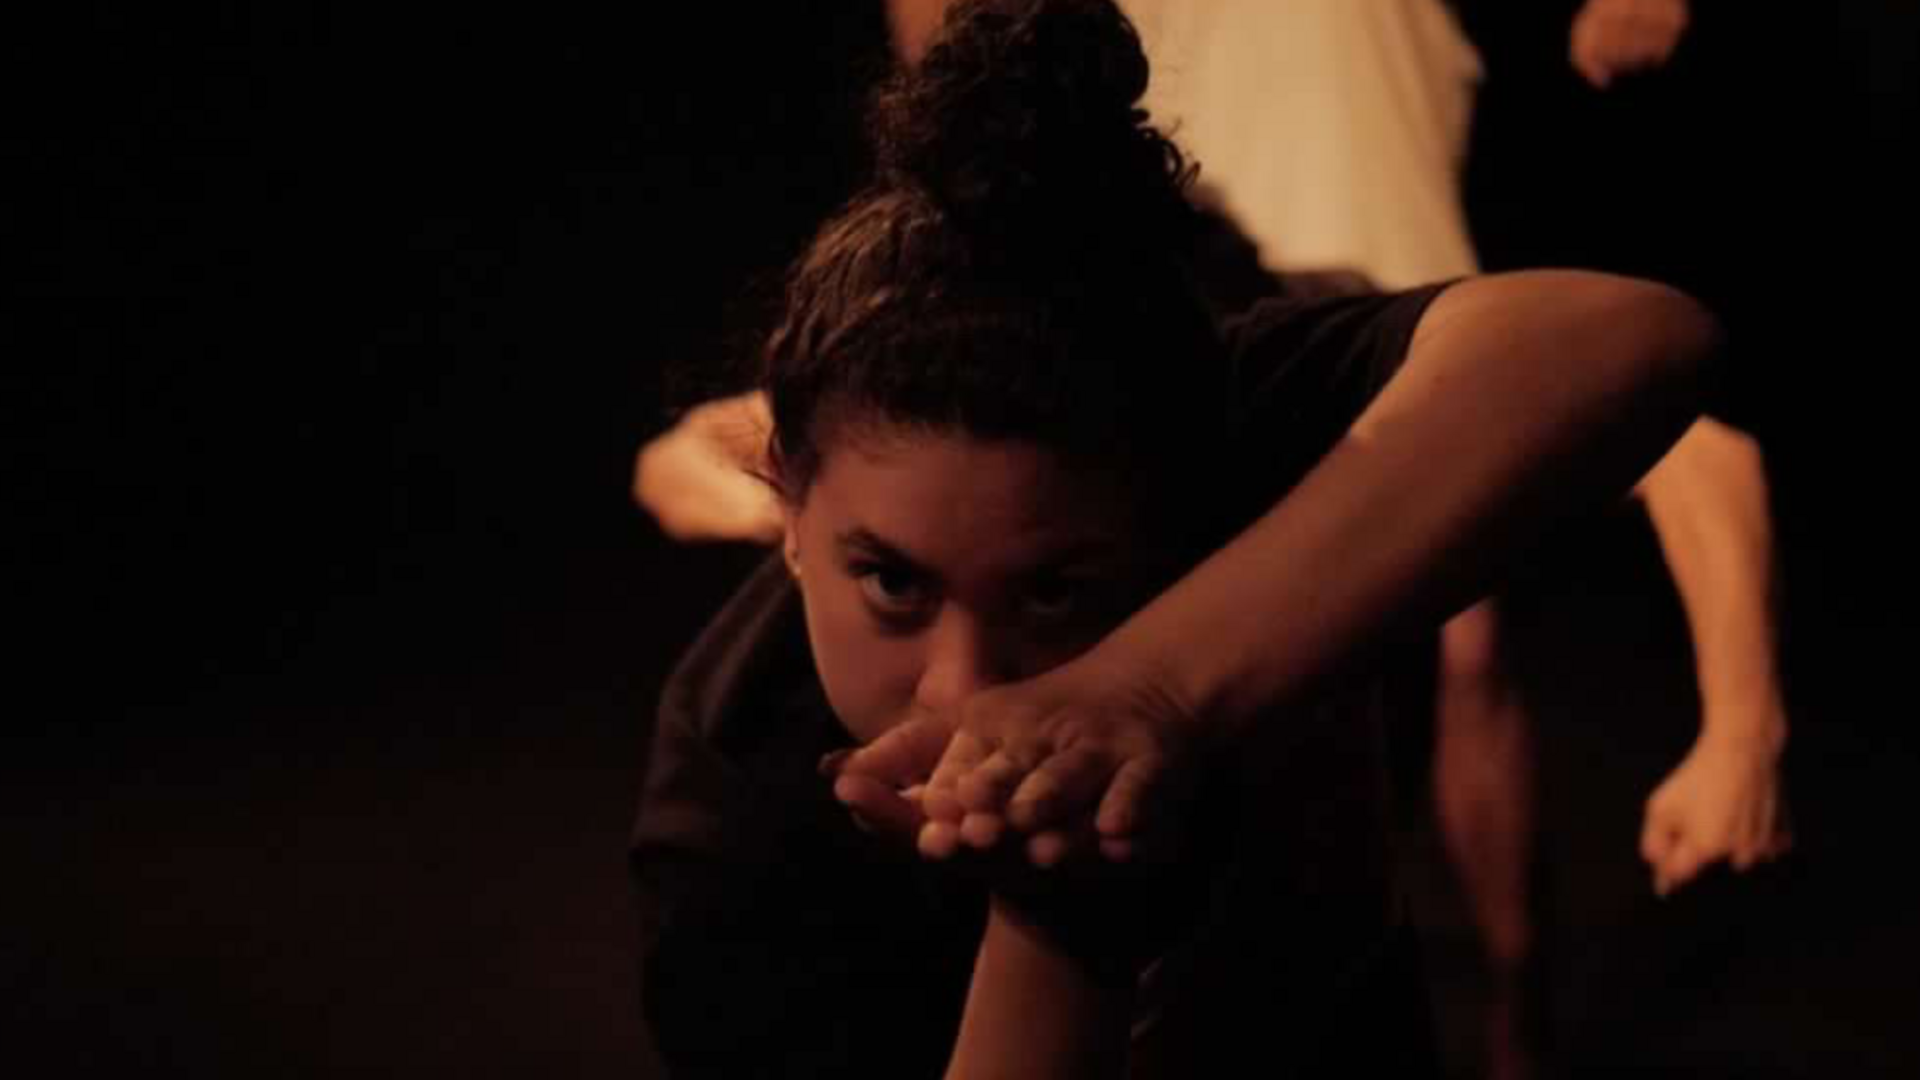 Dancer Brianna Kemmerling is performing on a dark stage. Her hands clasped together in front of her face, looking directly at you.